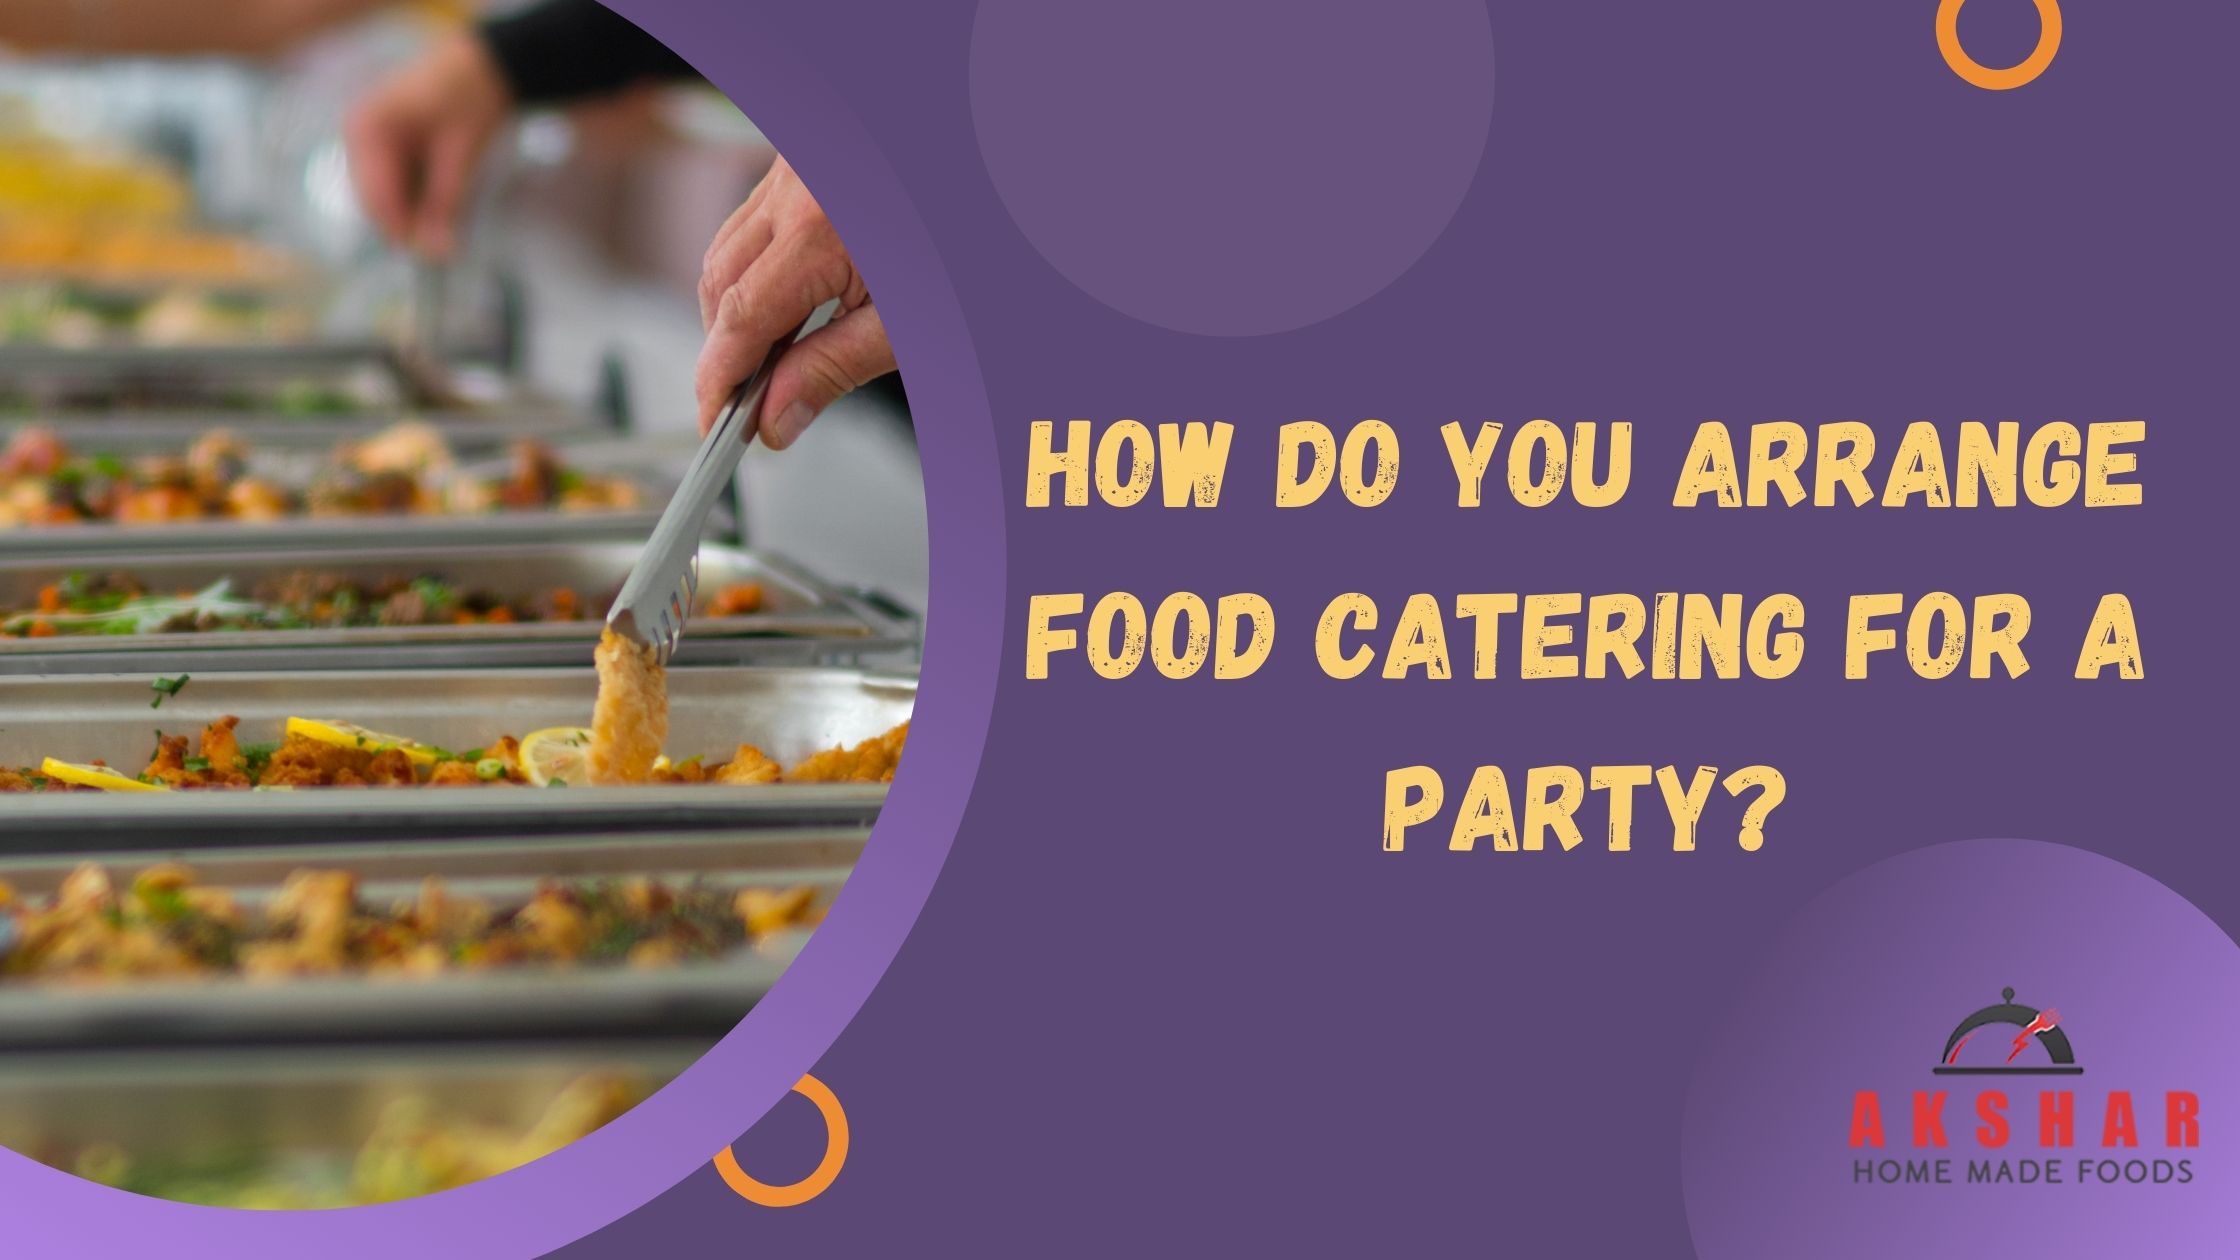 How do you arrange food catering for a party